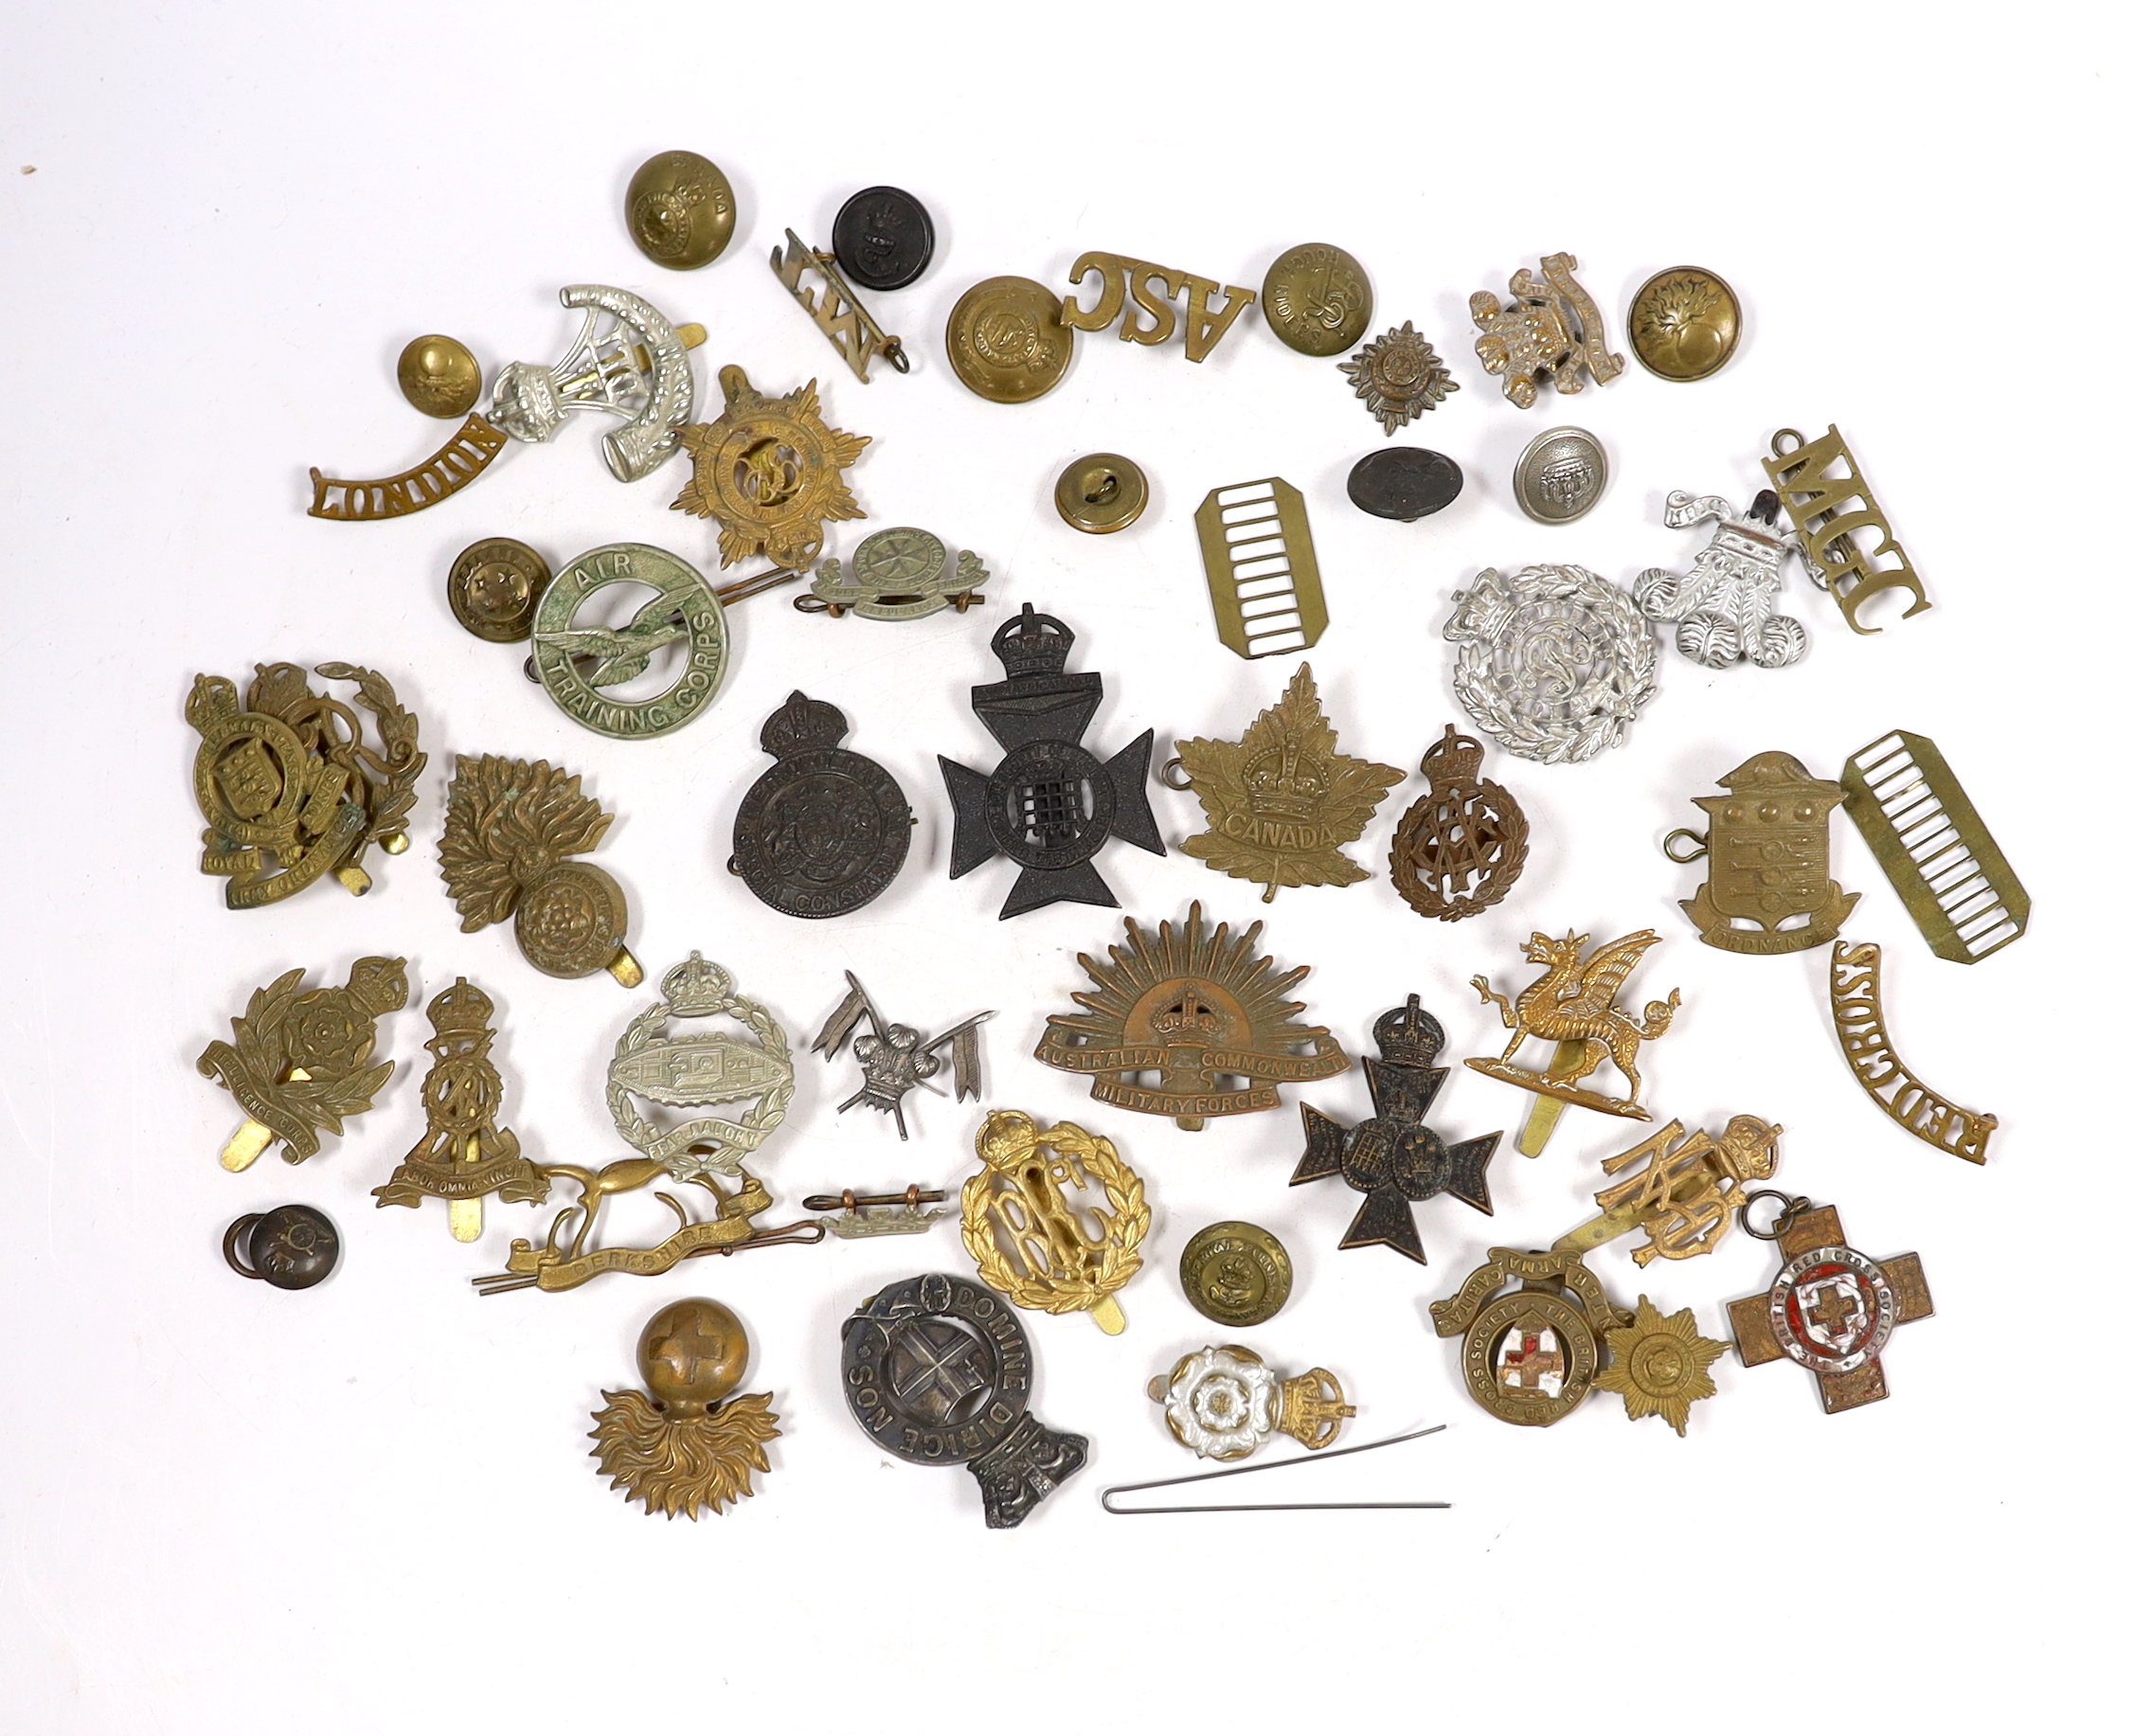 Twenty-five military cap badges including Air Training Corps, Australian Commonwealth Military Forces, Royal Army Ordinance Corps, Royal Engineers, Intelligence Corps, Royal Army Service Corps, RFC, etc. Together with a